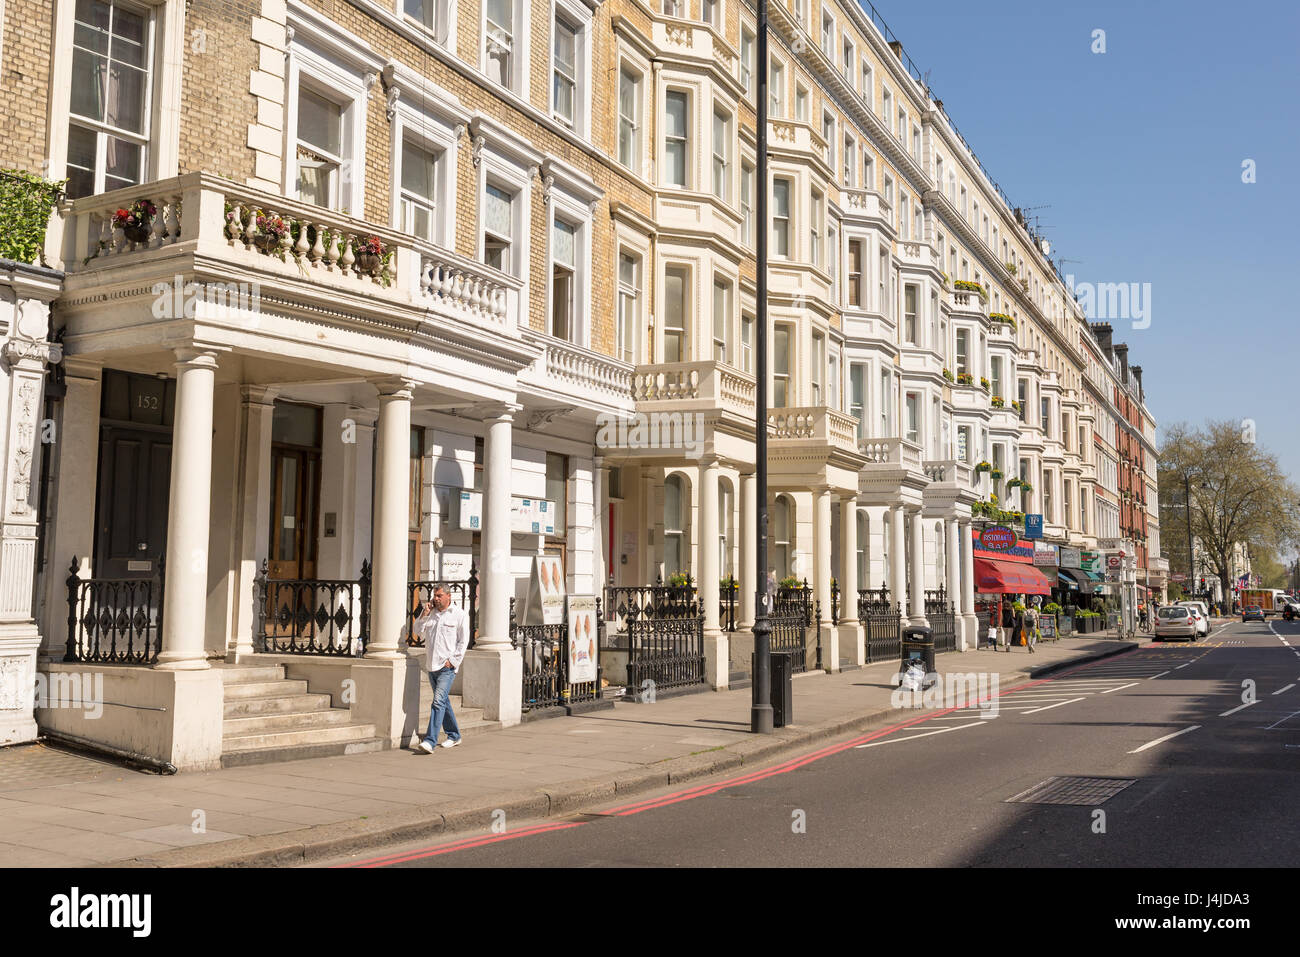 Cromwell Road, South Kensington, London, UK. With restored Victorian terraced houses and local businesses. Cromwell Road is a major road in the exclus Stock Photo